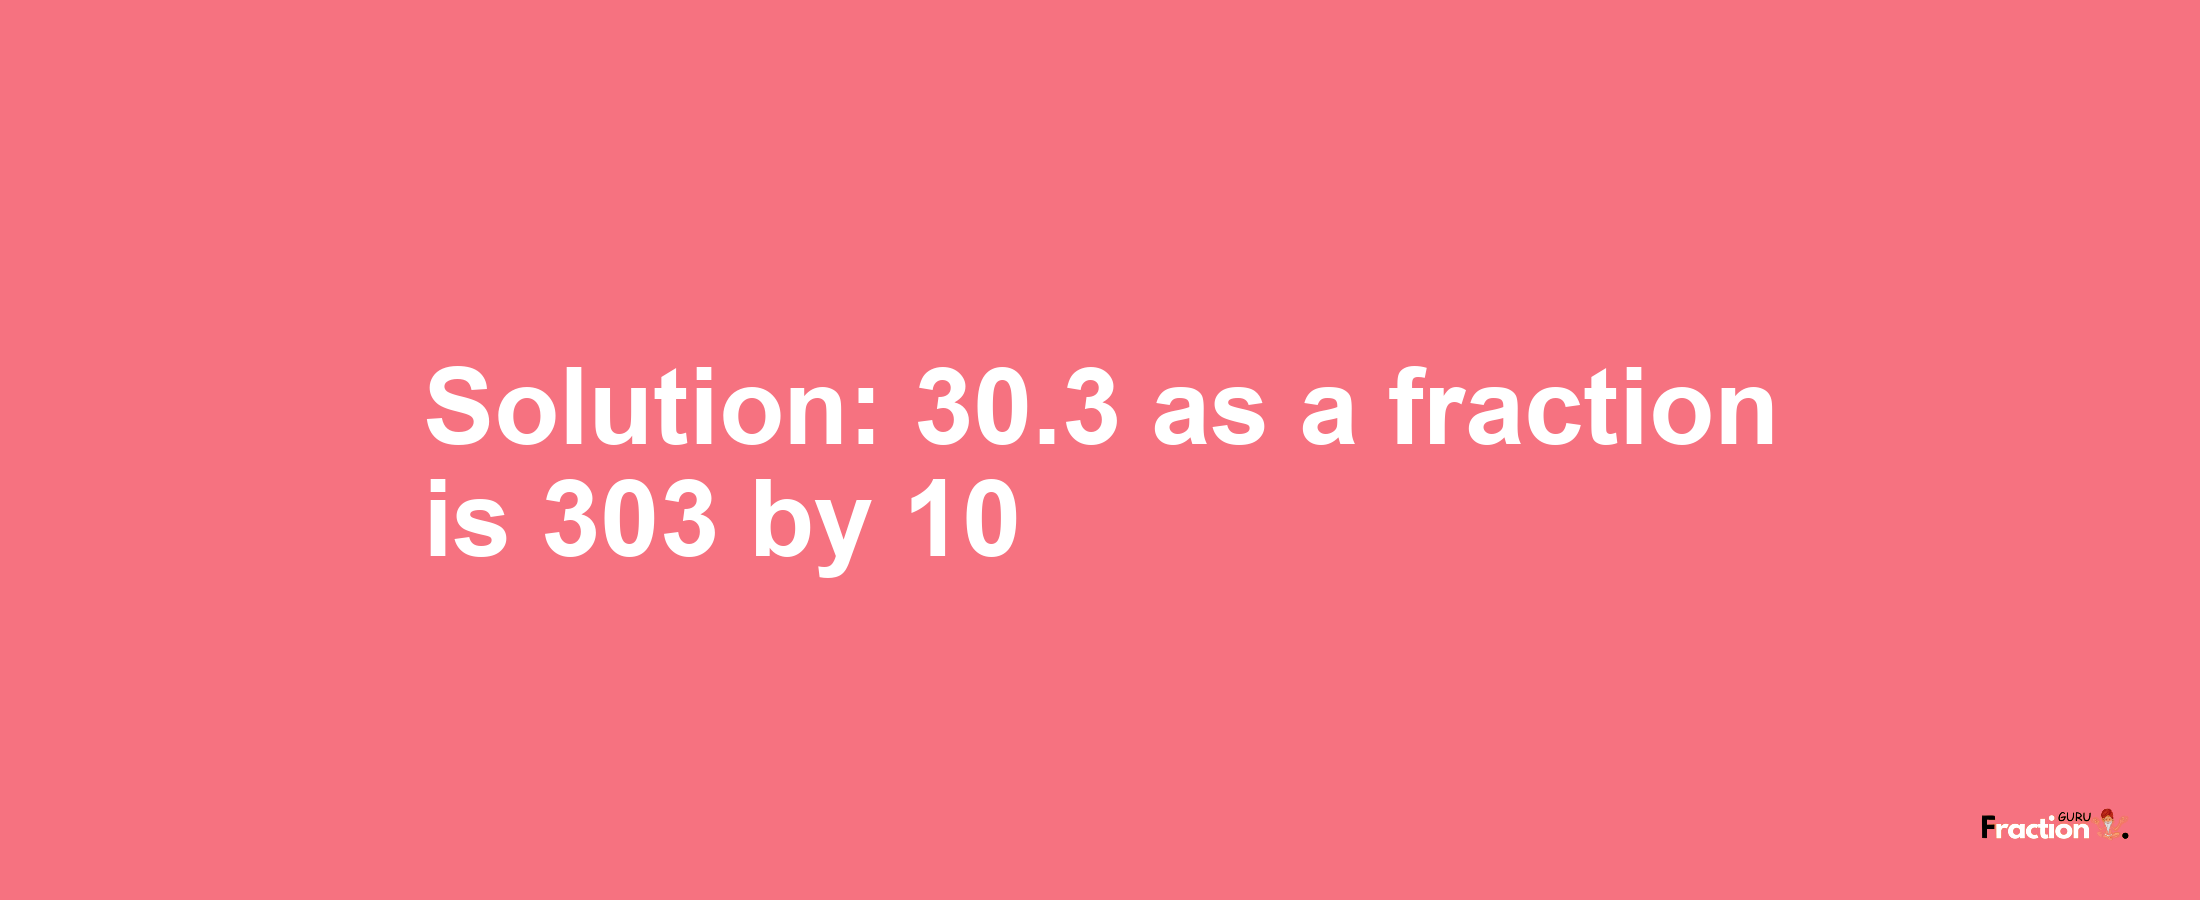 Solution:30.3 as a fraction is 303/10